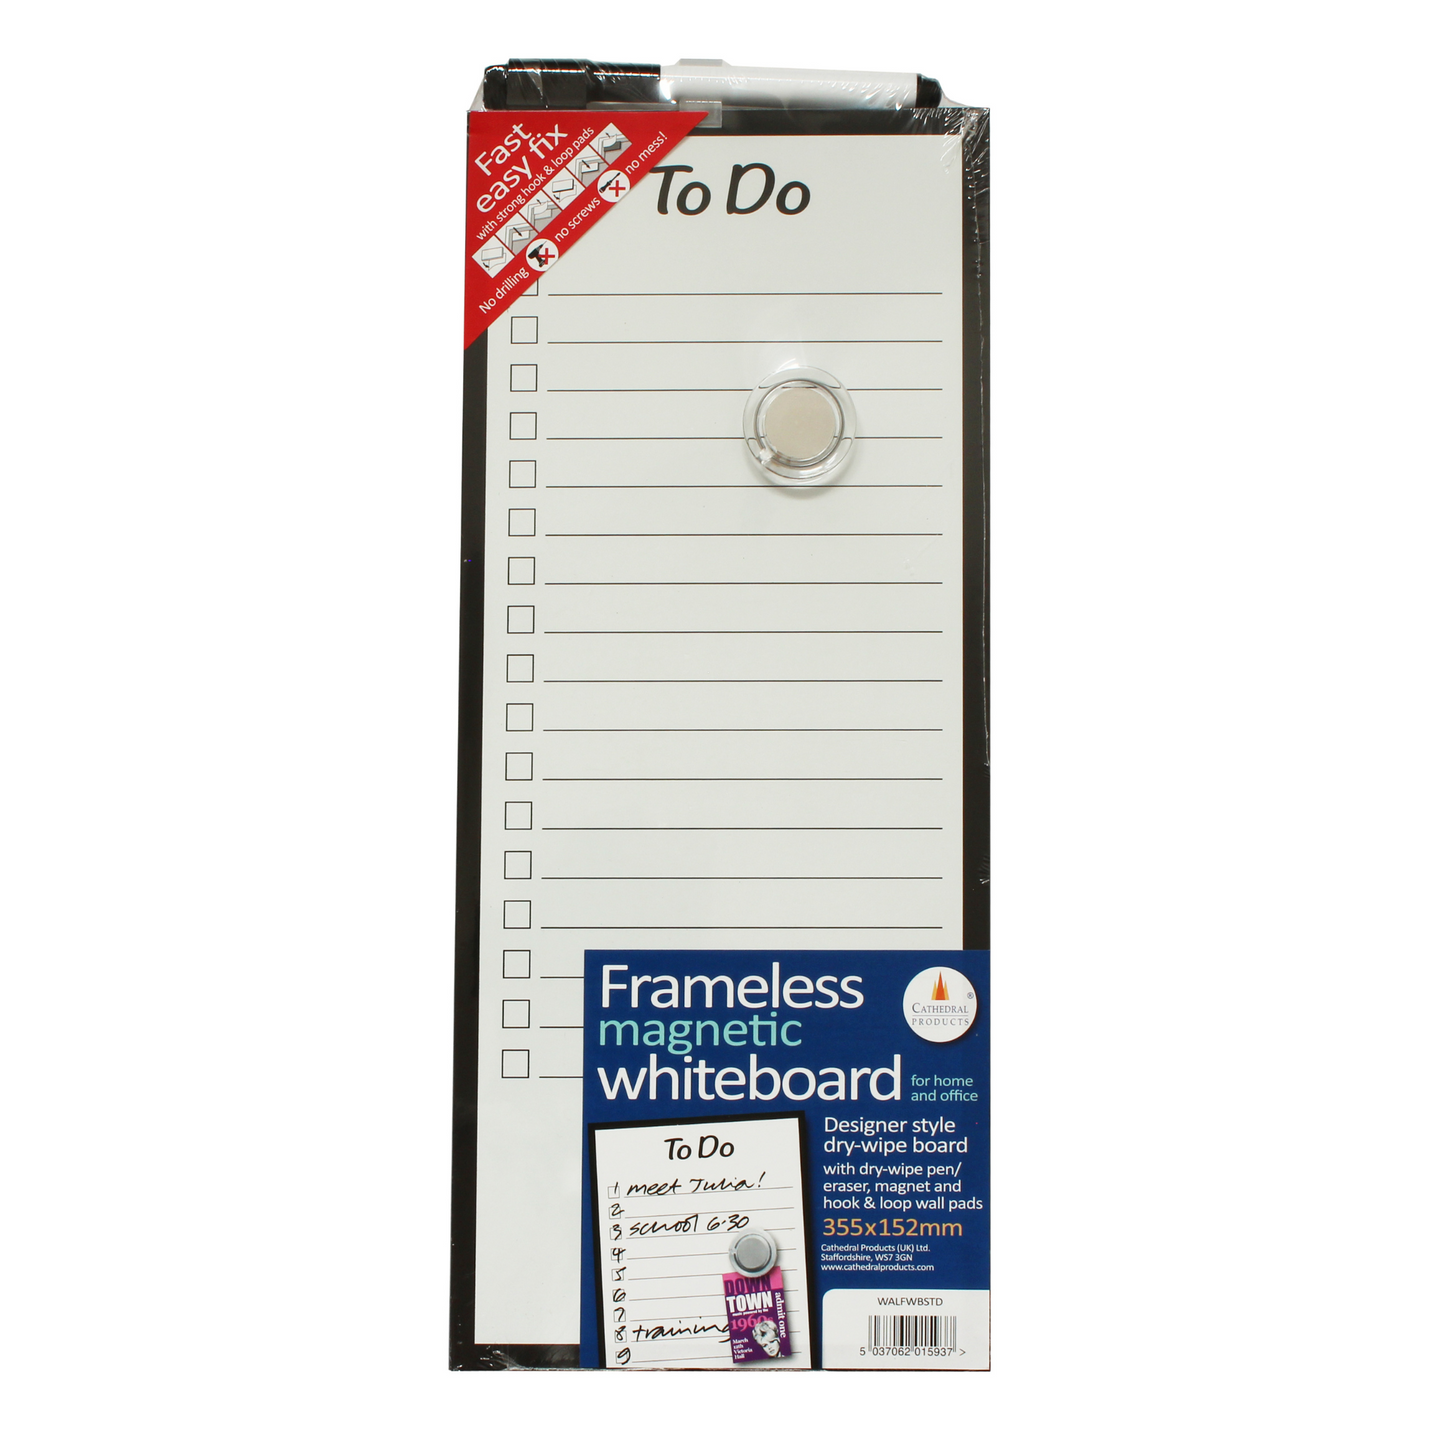 Retail packaging for an Easy Fix Frameless Dry To Do Planner, size 15 x 35 cm. The packaging features the whiteboard with a 'To Do' list design, a round, transparent magnet, and a marker with eraser in the lid. Visible texts include product features like 'designer style dry-wipe board' and 'includes magnet and hook & loop wall pads'.